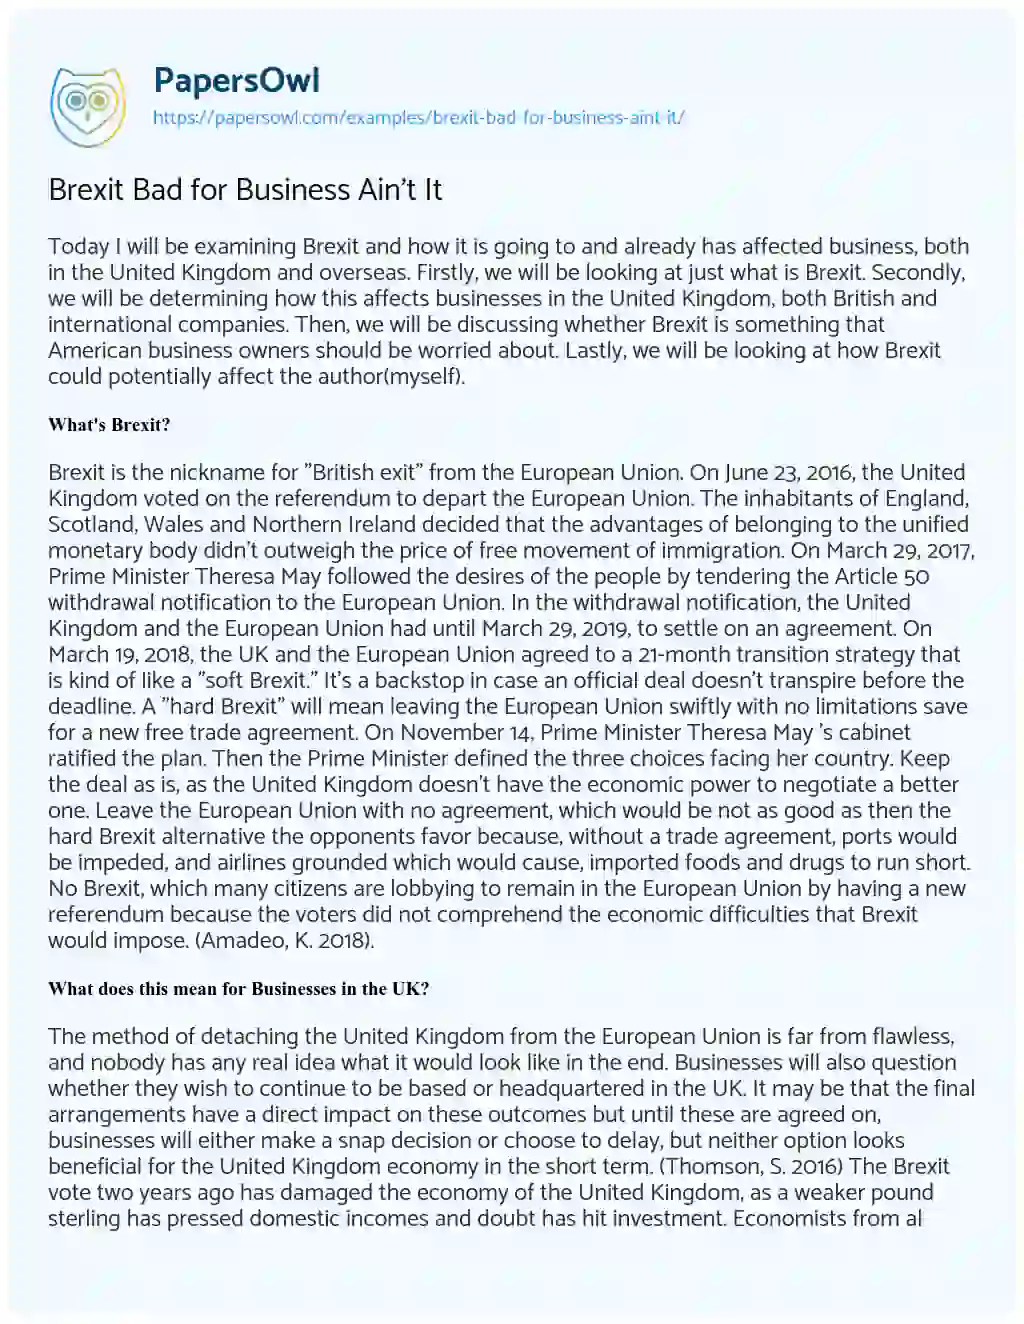 Essay on Brexit Bad for Business Ain’t it